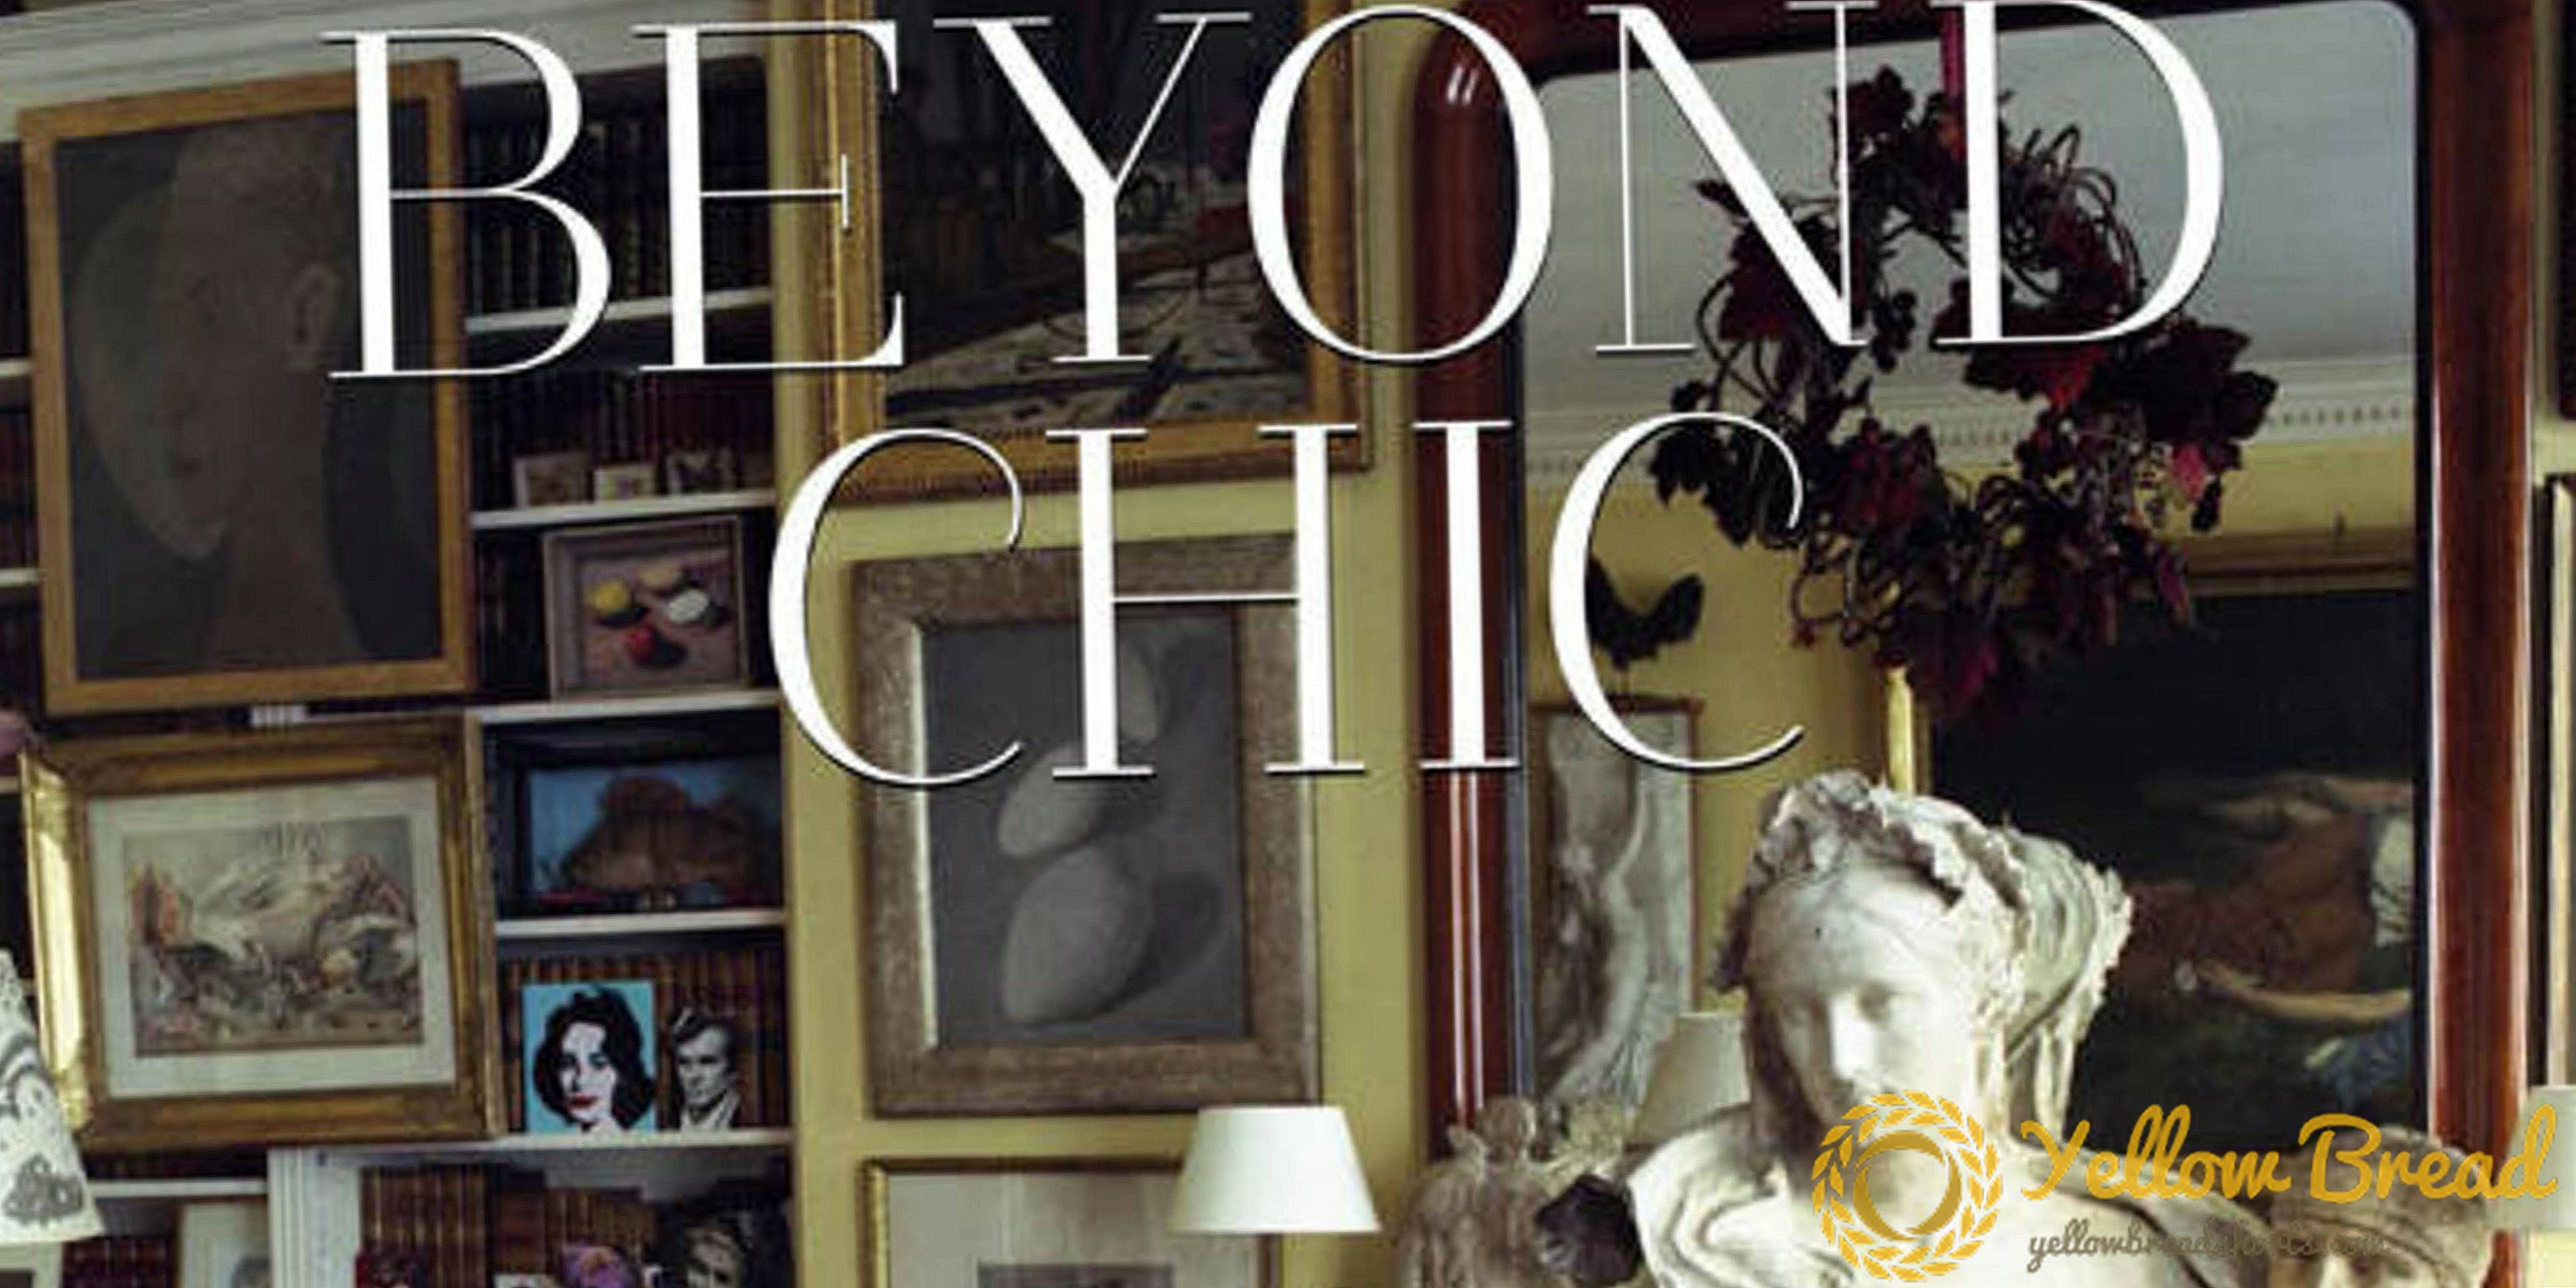 Well-Read: Beyond Chic